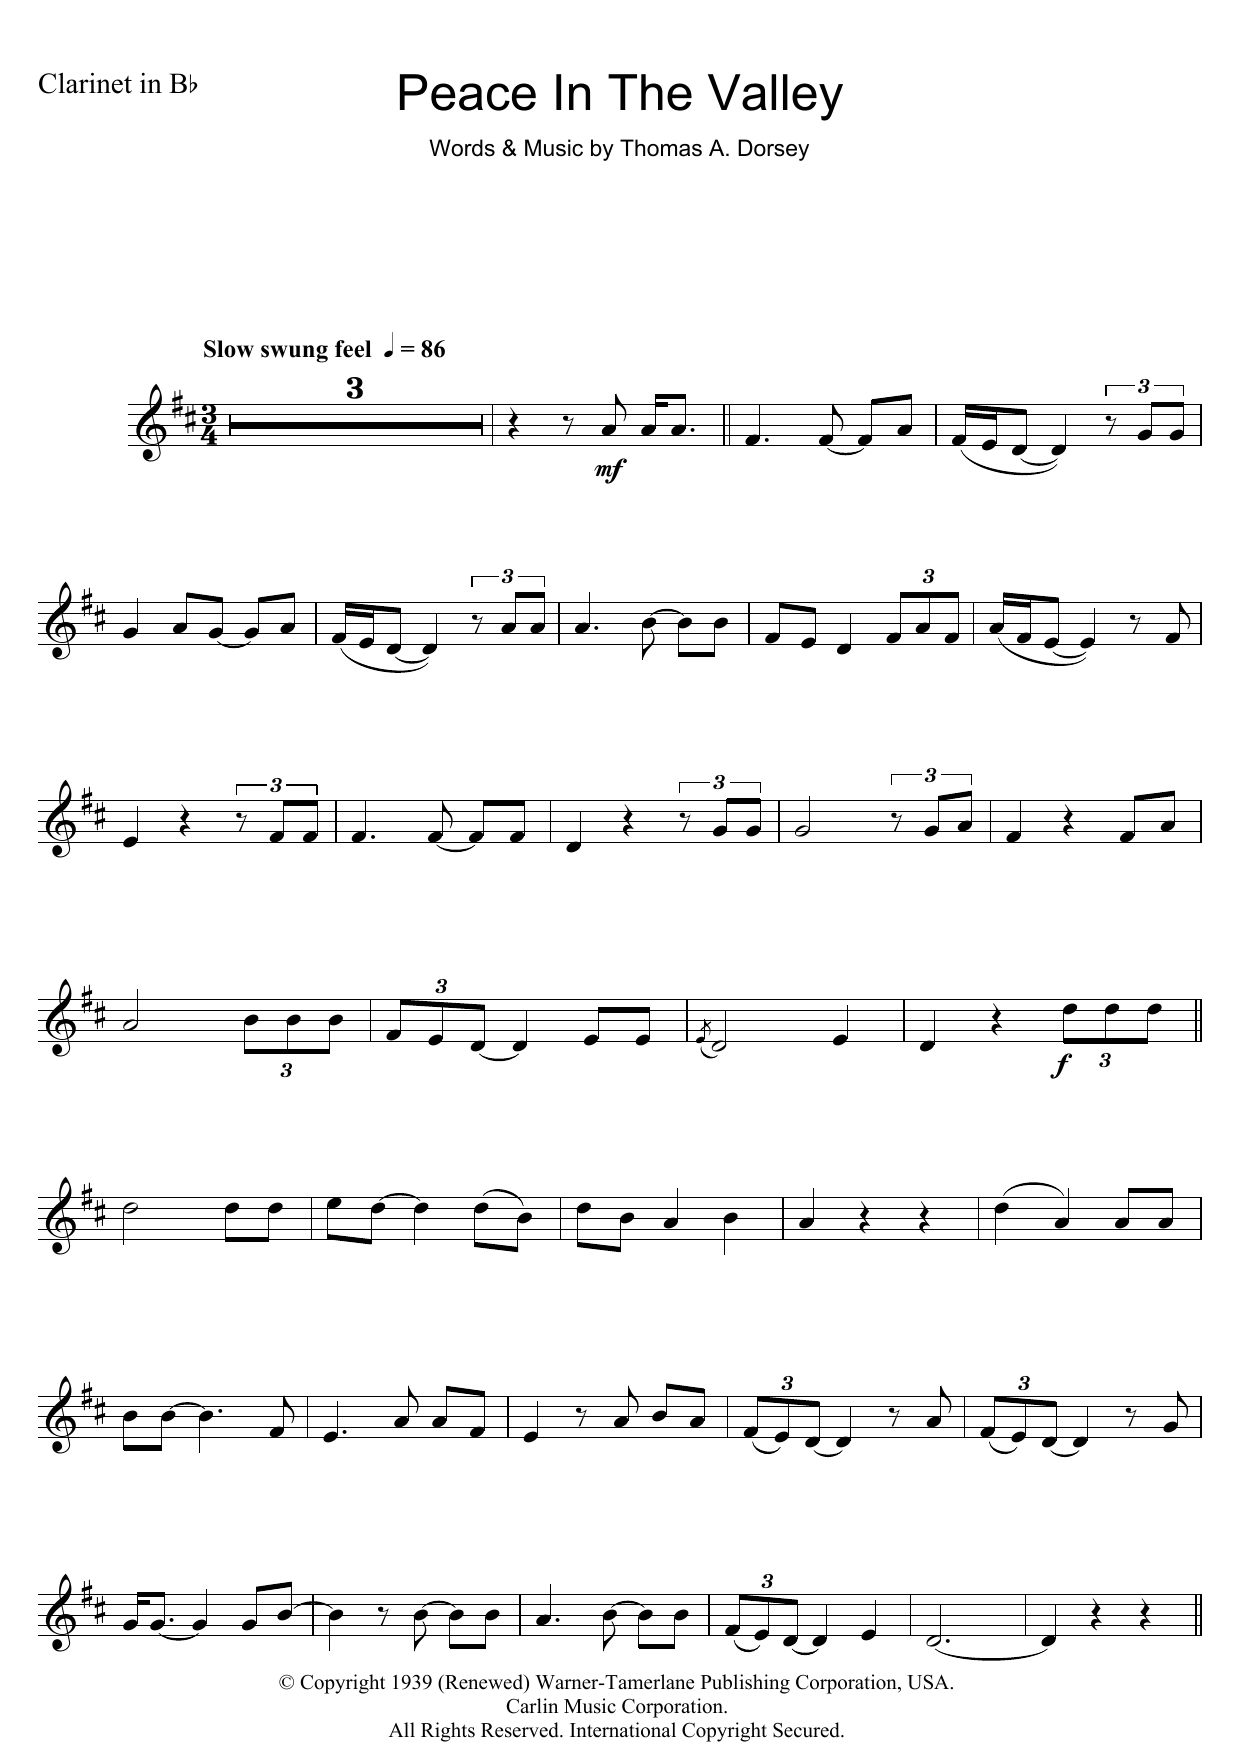 Download Mahalia Jackson (There'll Be) Peace In The Valley (For Sheet Music